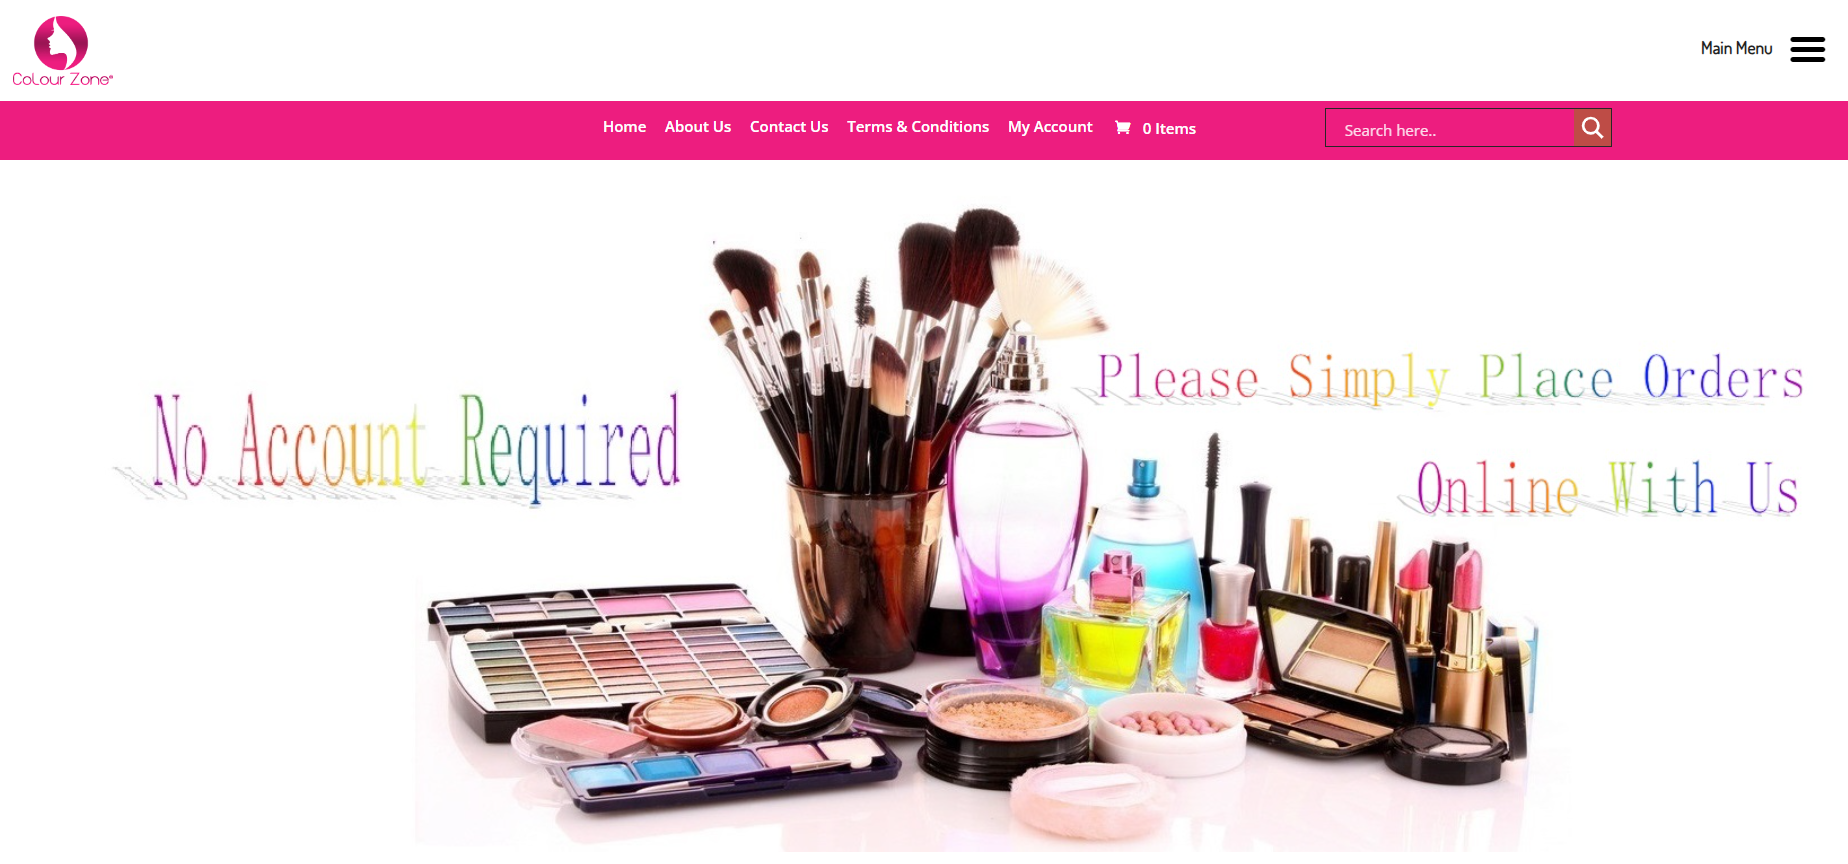 Colour Zone is among the top dropshipping suppliers in the UK, offering a vast selection of beauty items from various brands. They have everything from makeup and nail products to skin and body care essentials. 